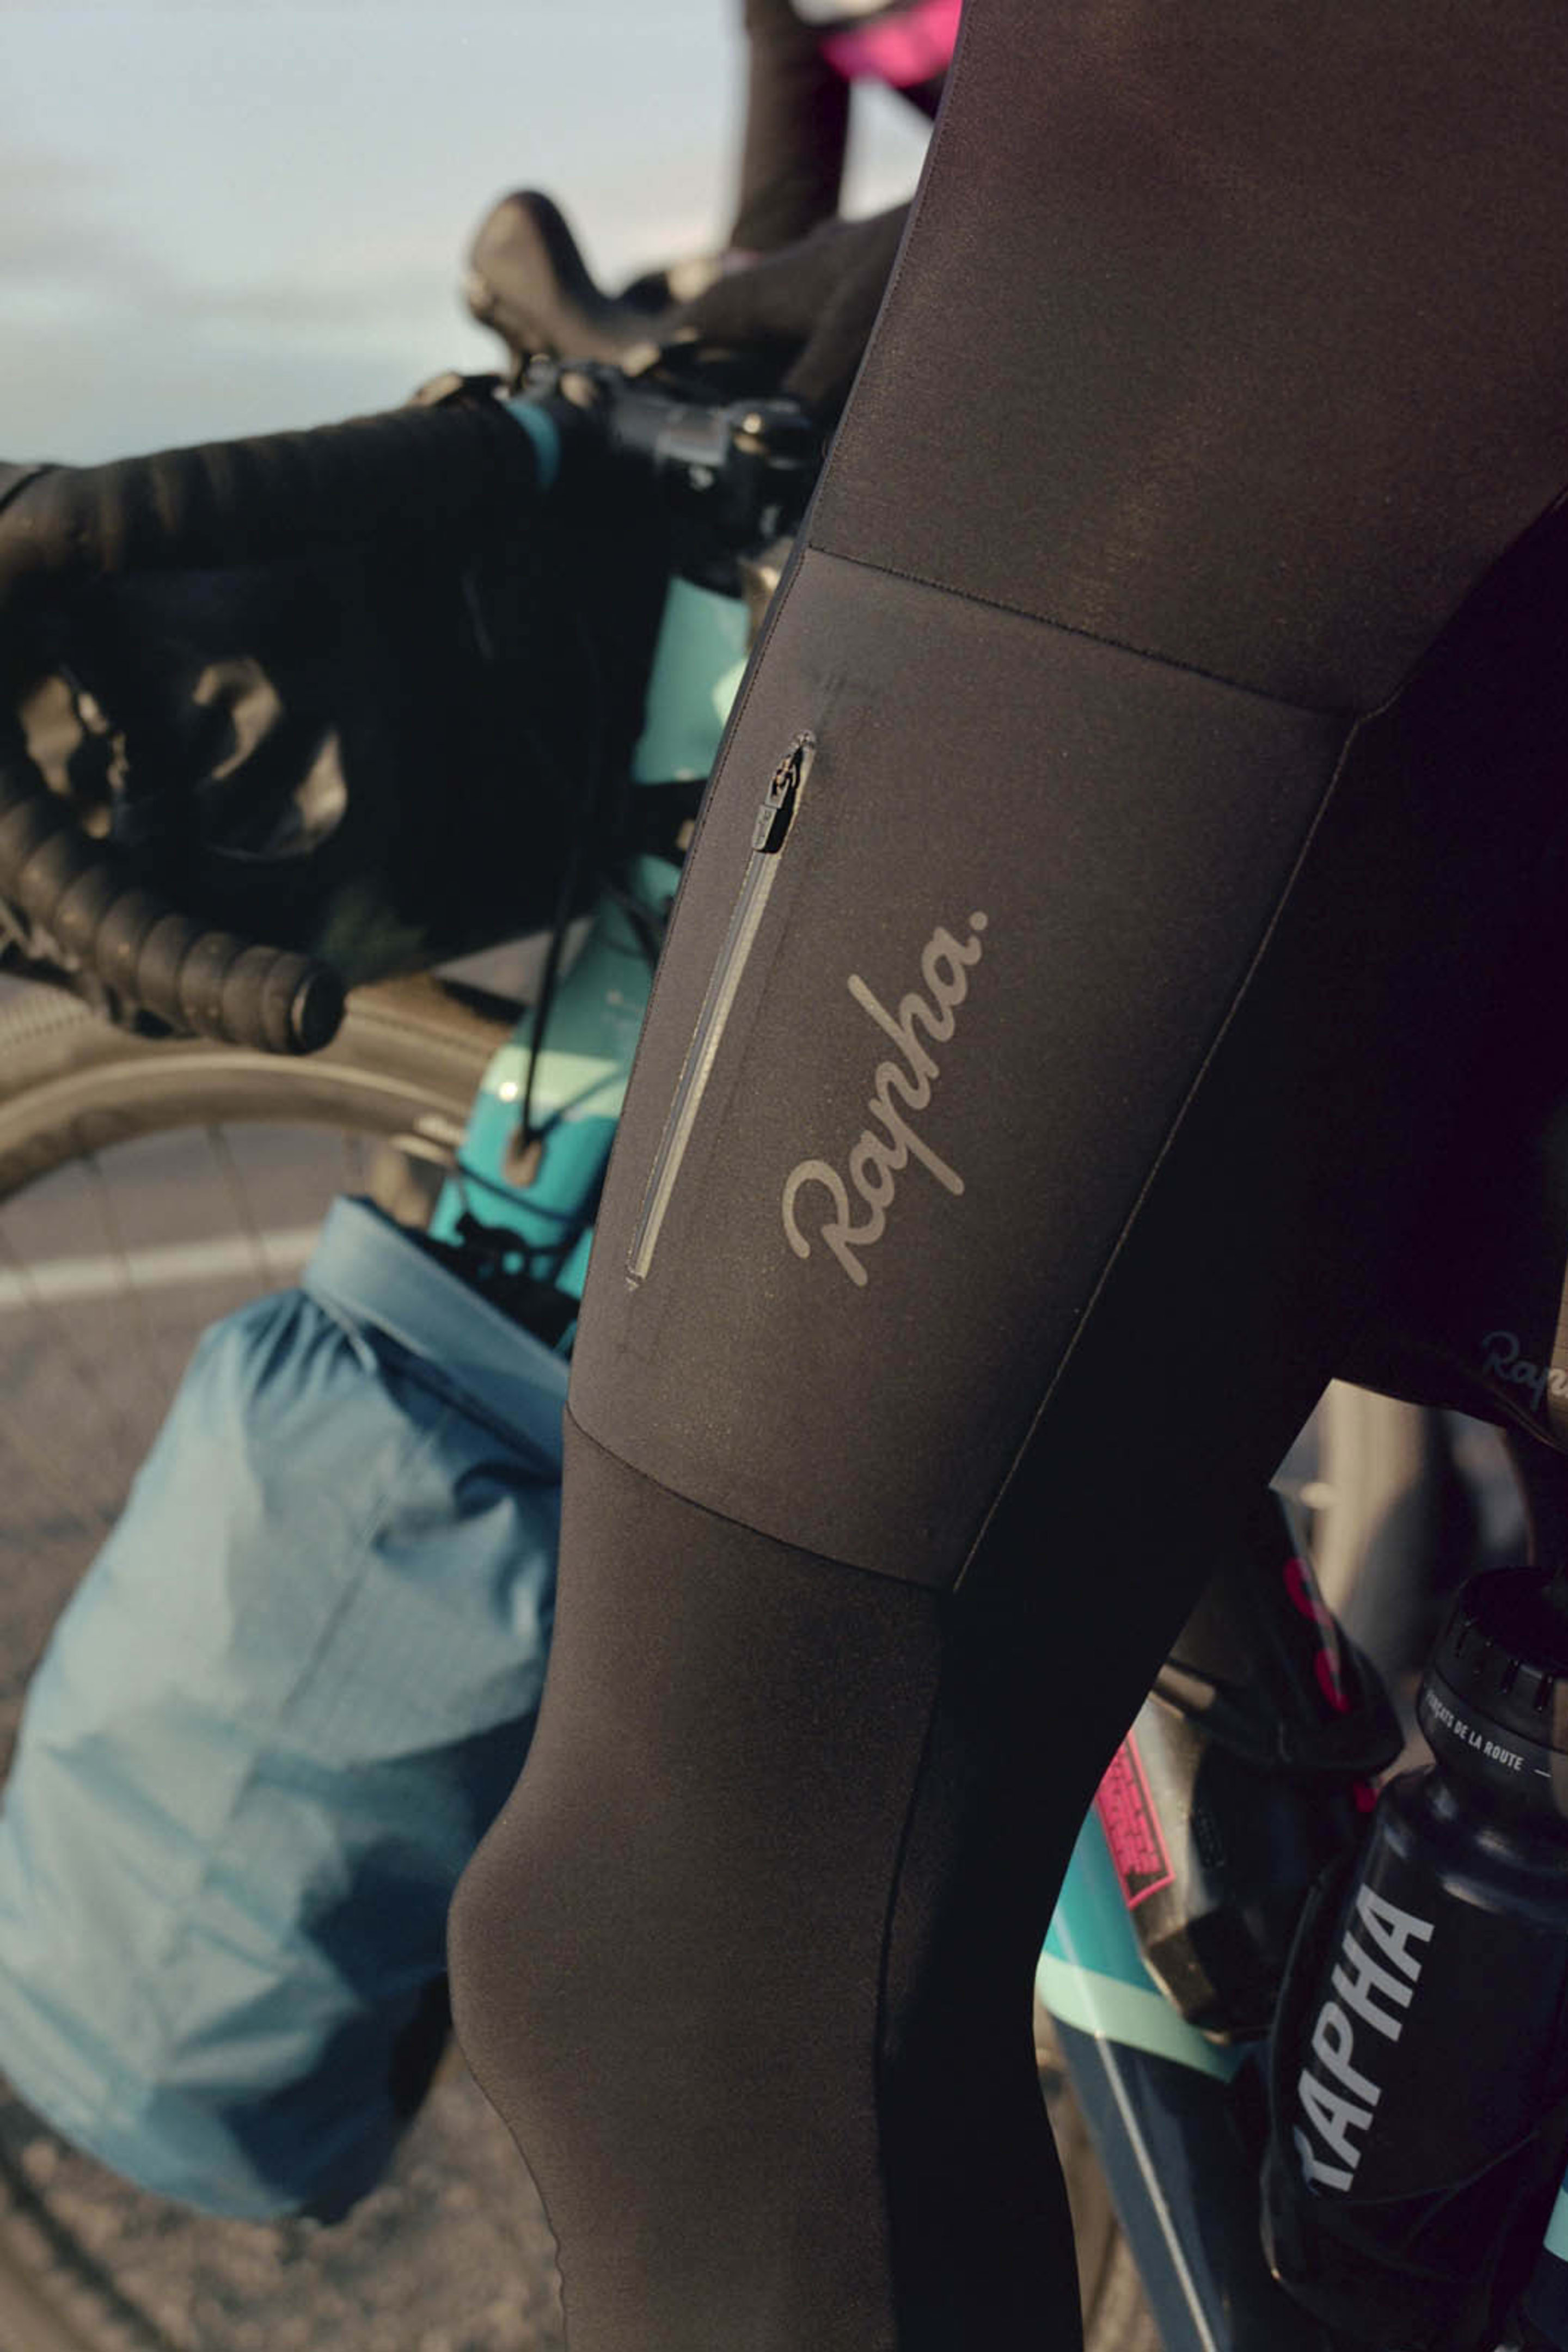 Rapha's Guide to Riding in Winter - Men's